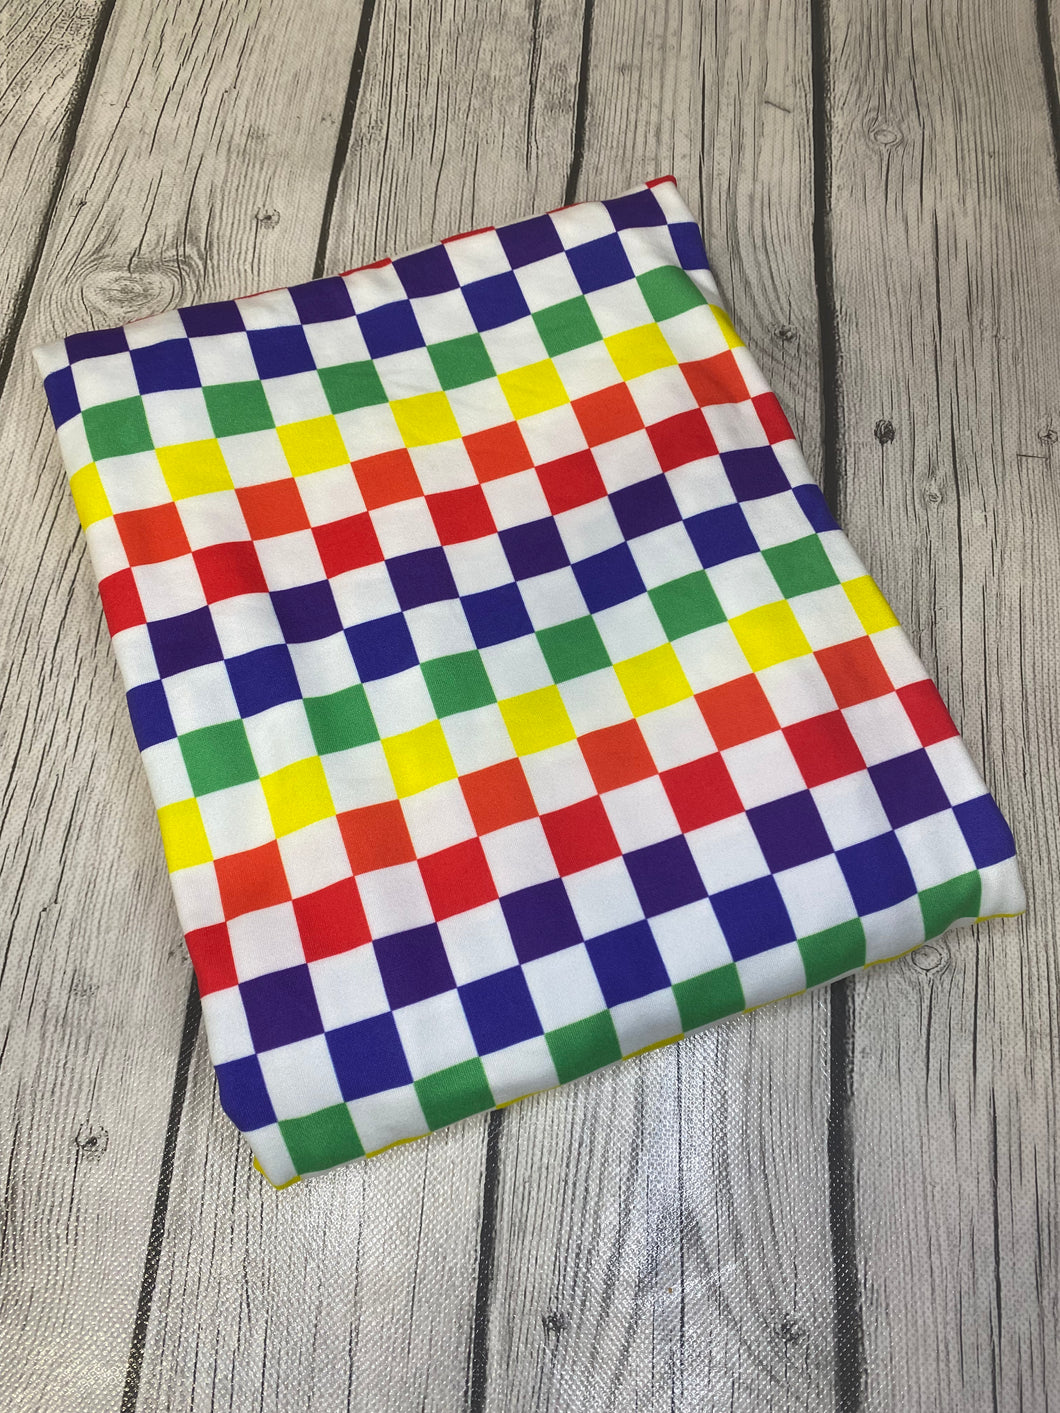 Ready to Ship DBP Fabric Vans Inspired Rainbow Checkered Shapes Brands makes great bows, head wraps, bummies, and more.